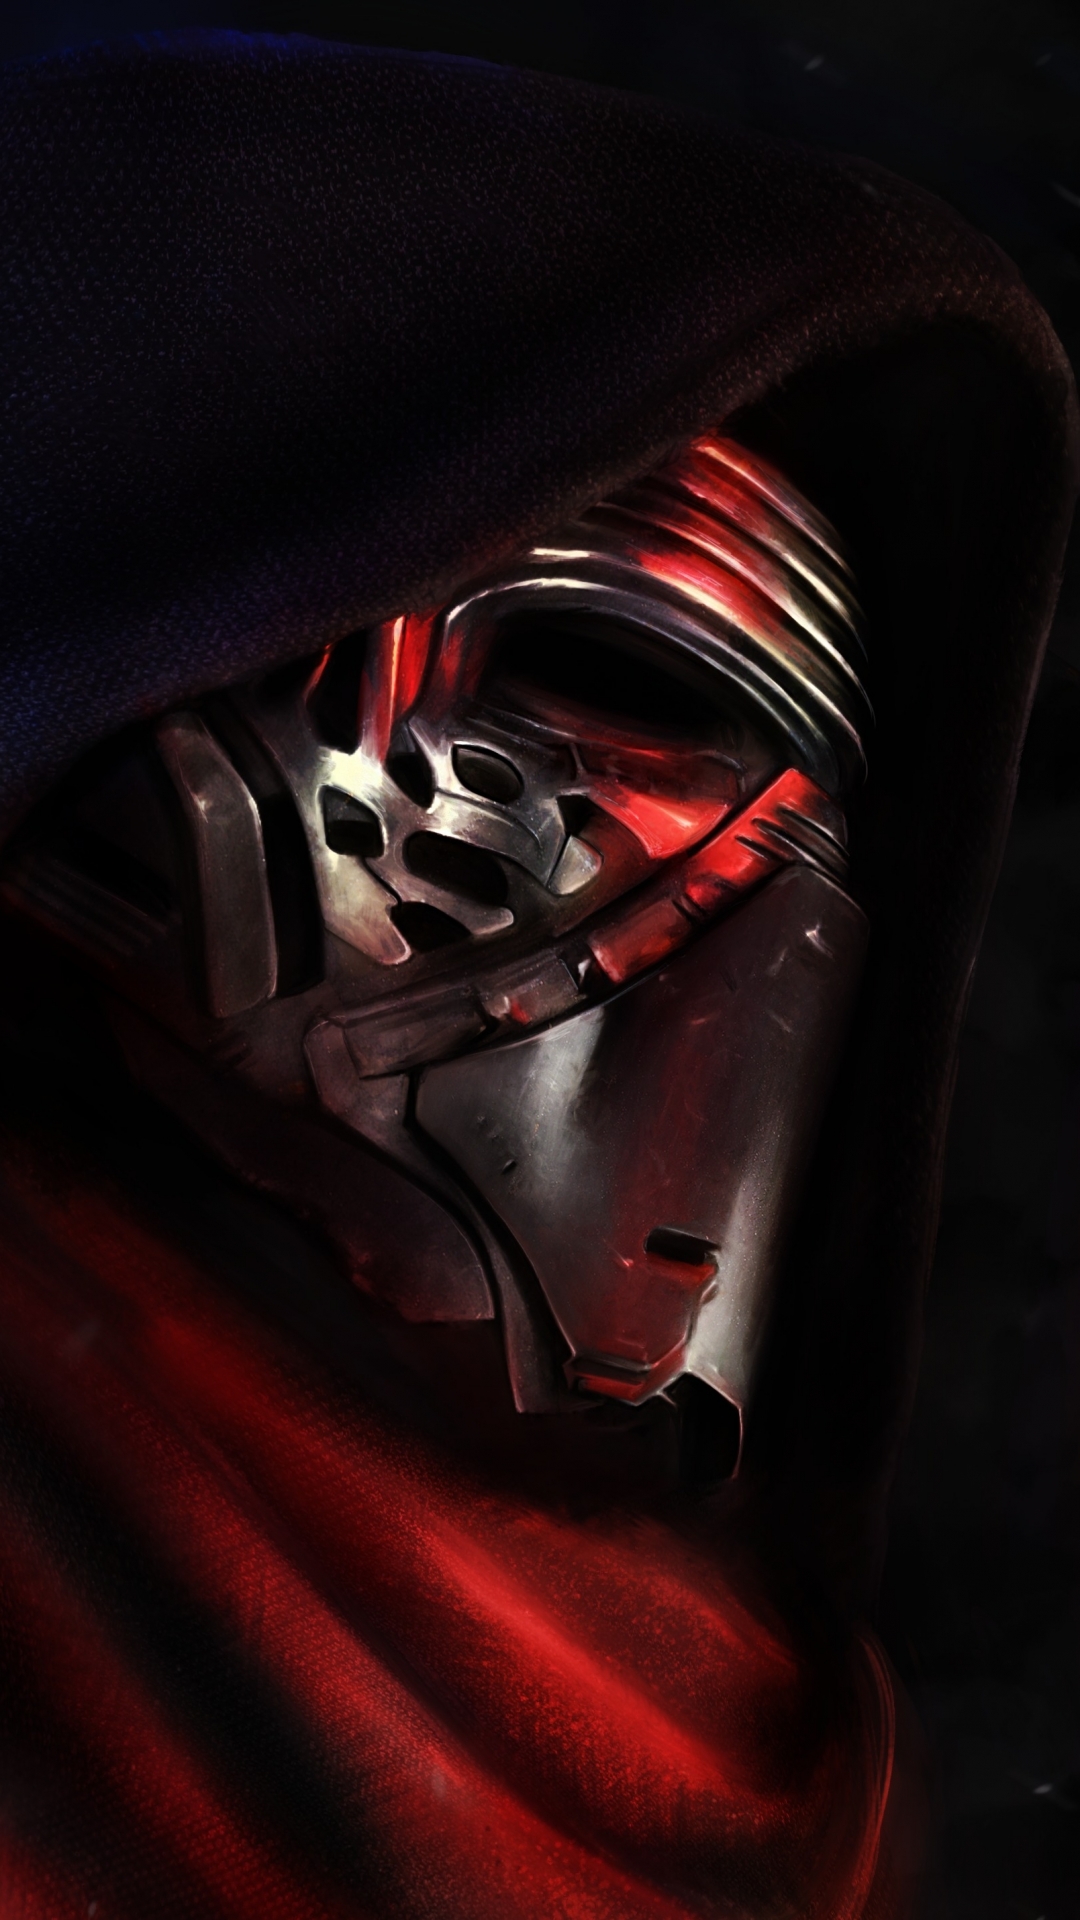 Star Wars: The Force Awakens iPhone wallpapers